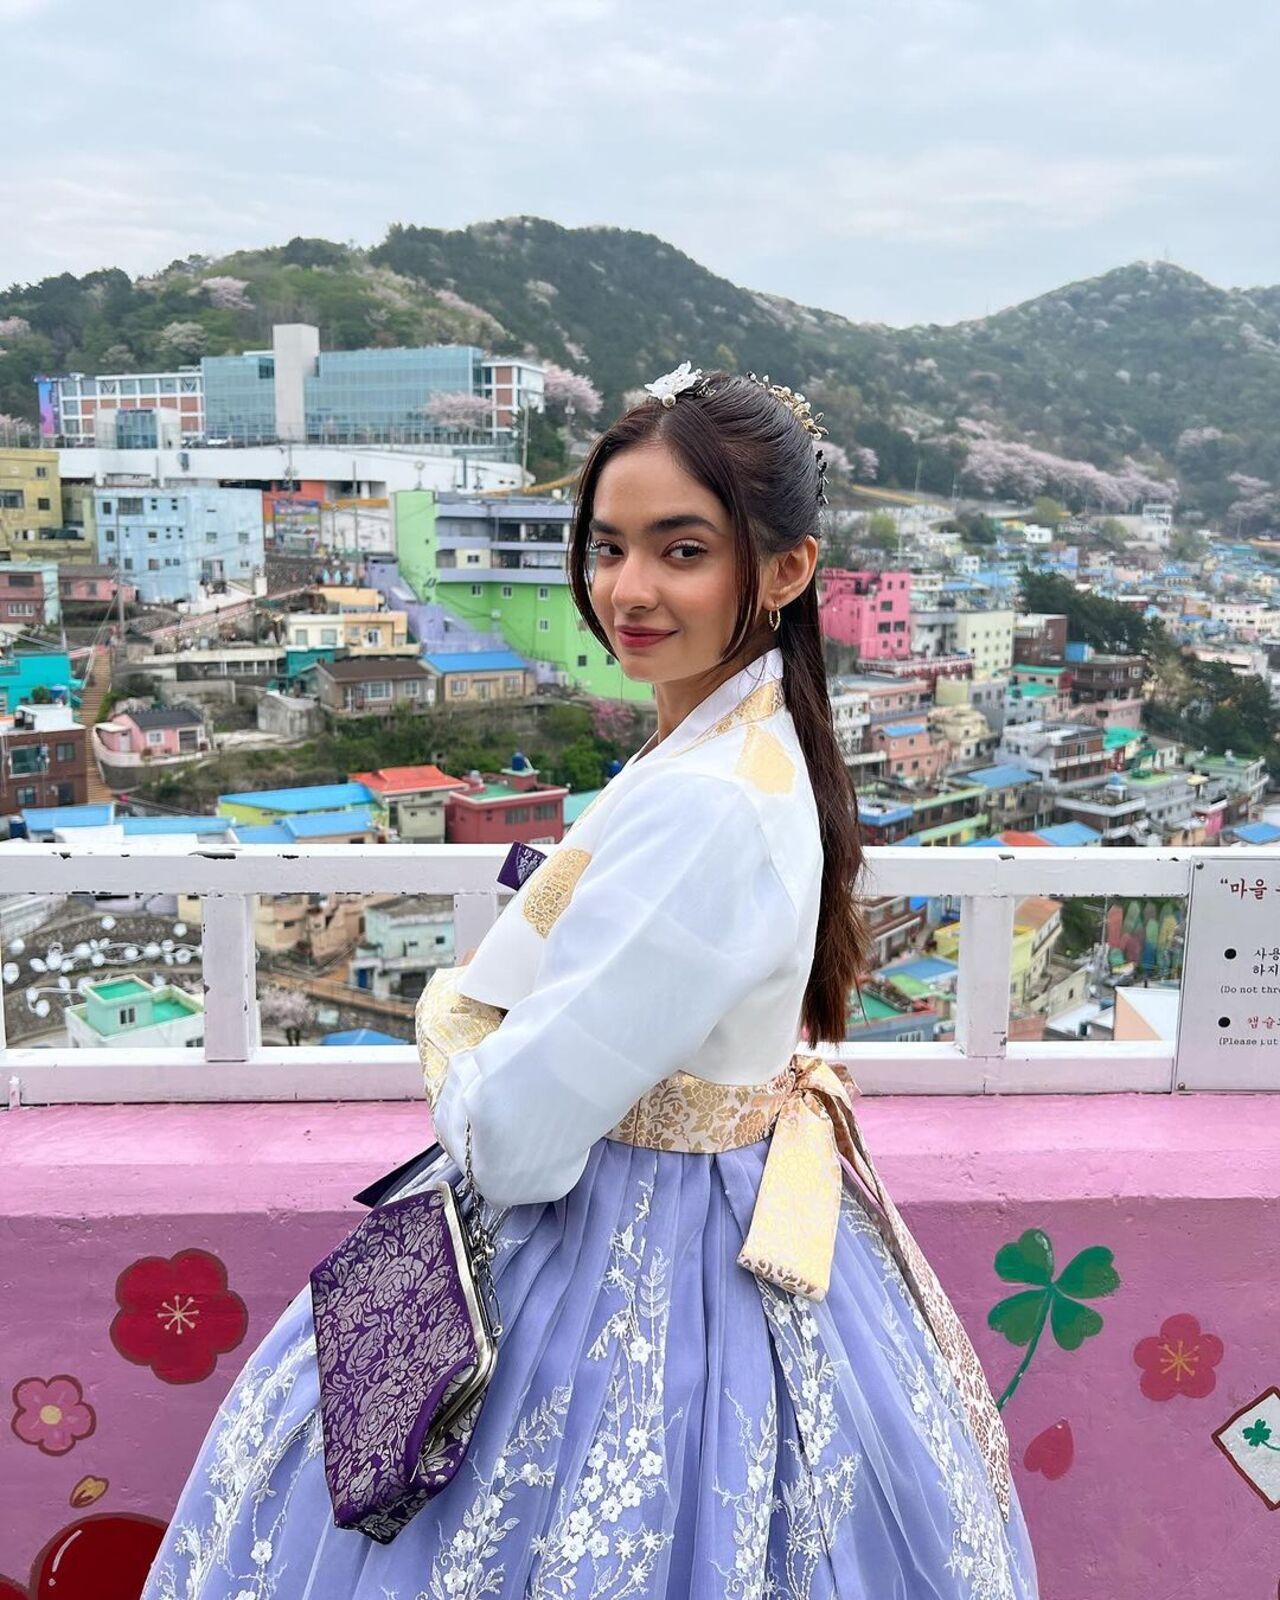 Anushka, who enjoys 39.4 million followers wore a pastel blue hanbok and posed against the picturesque mountains. 